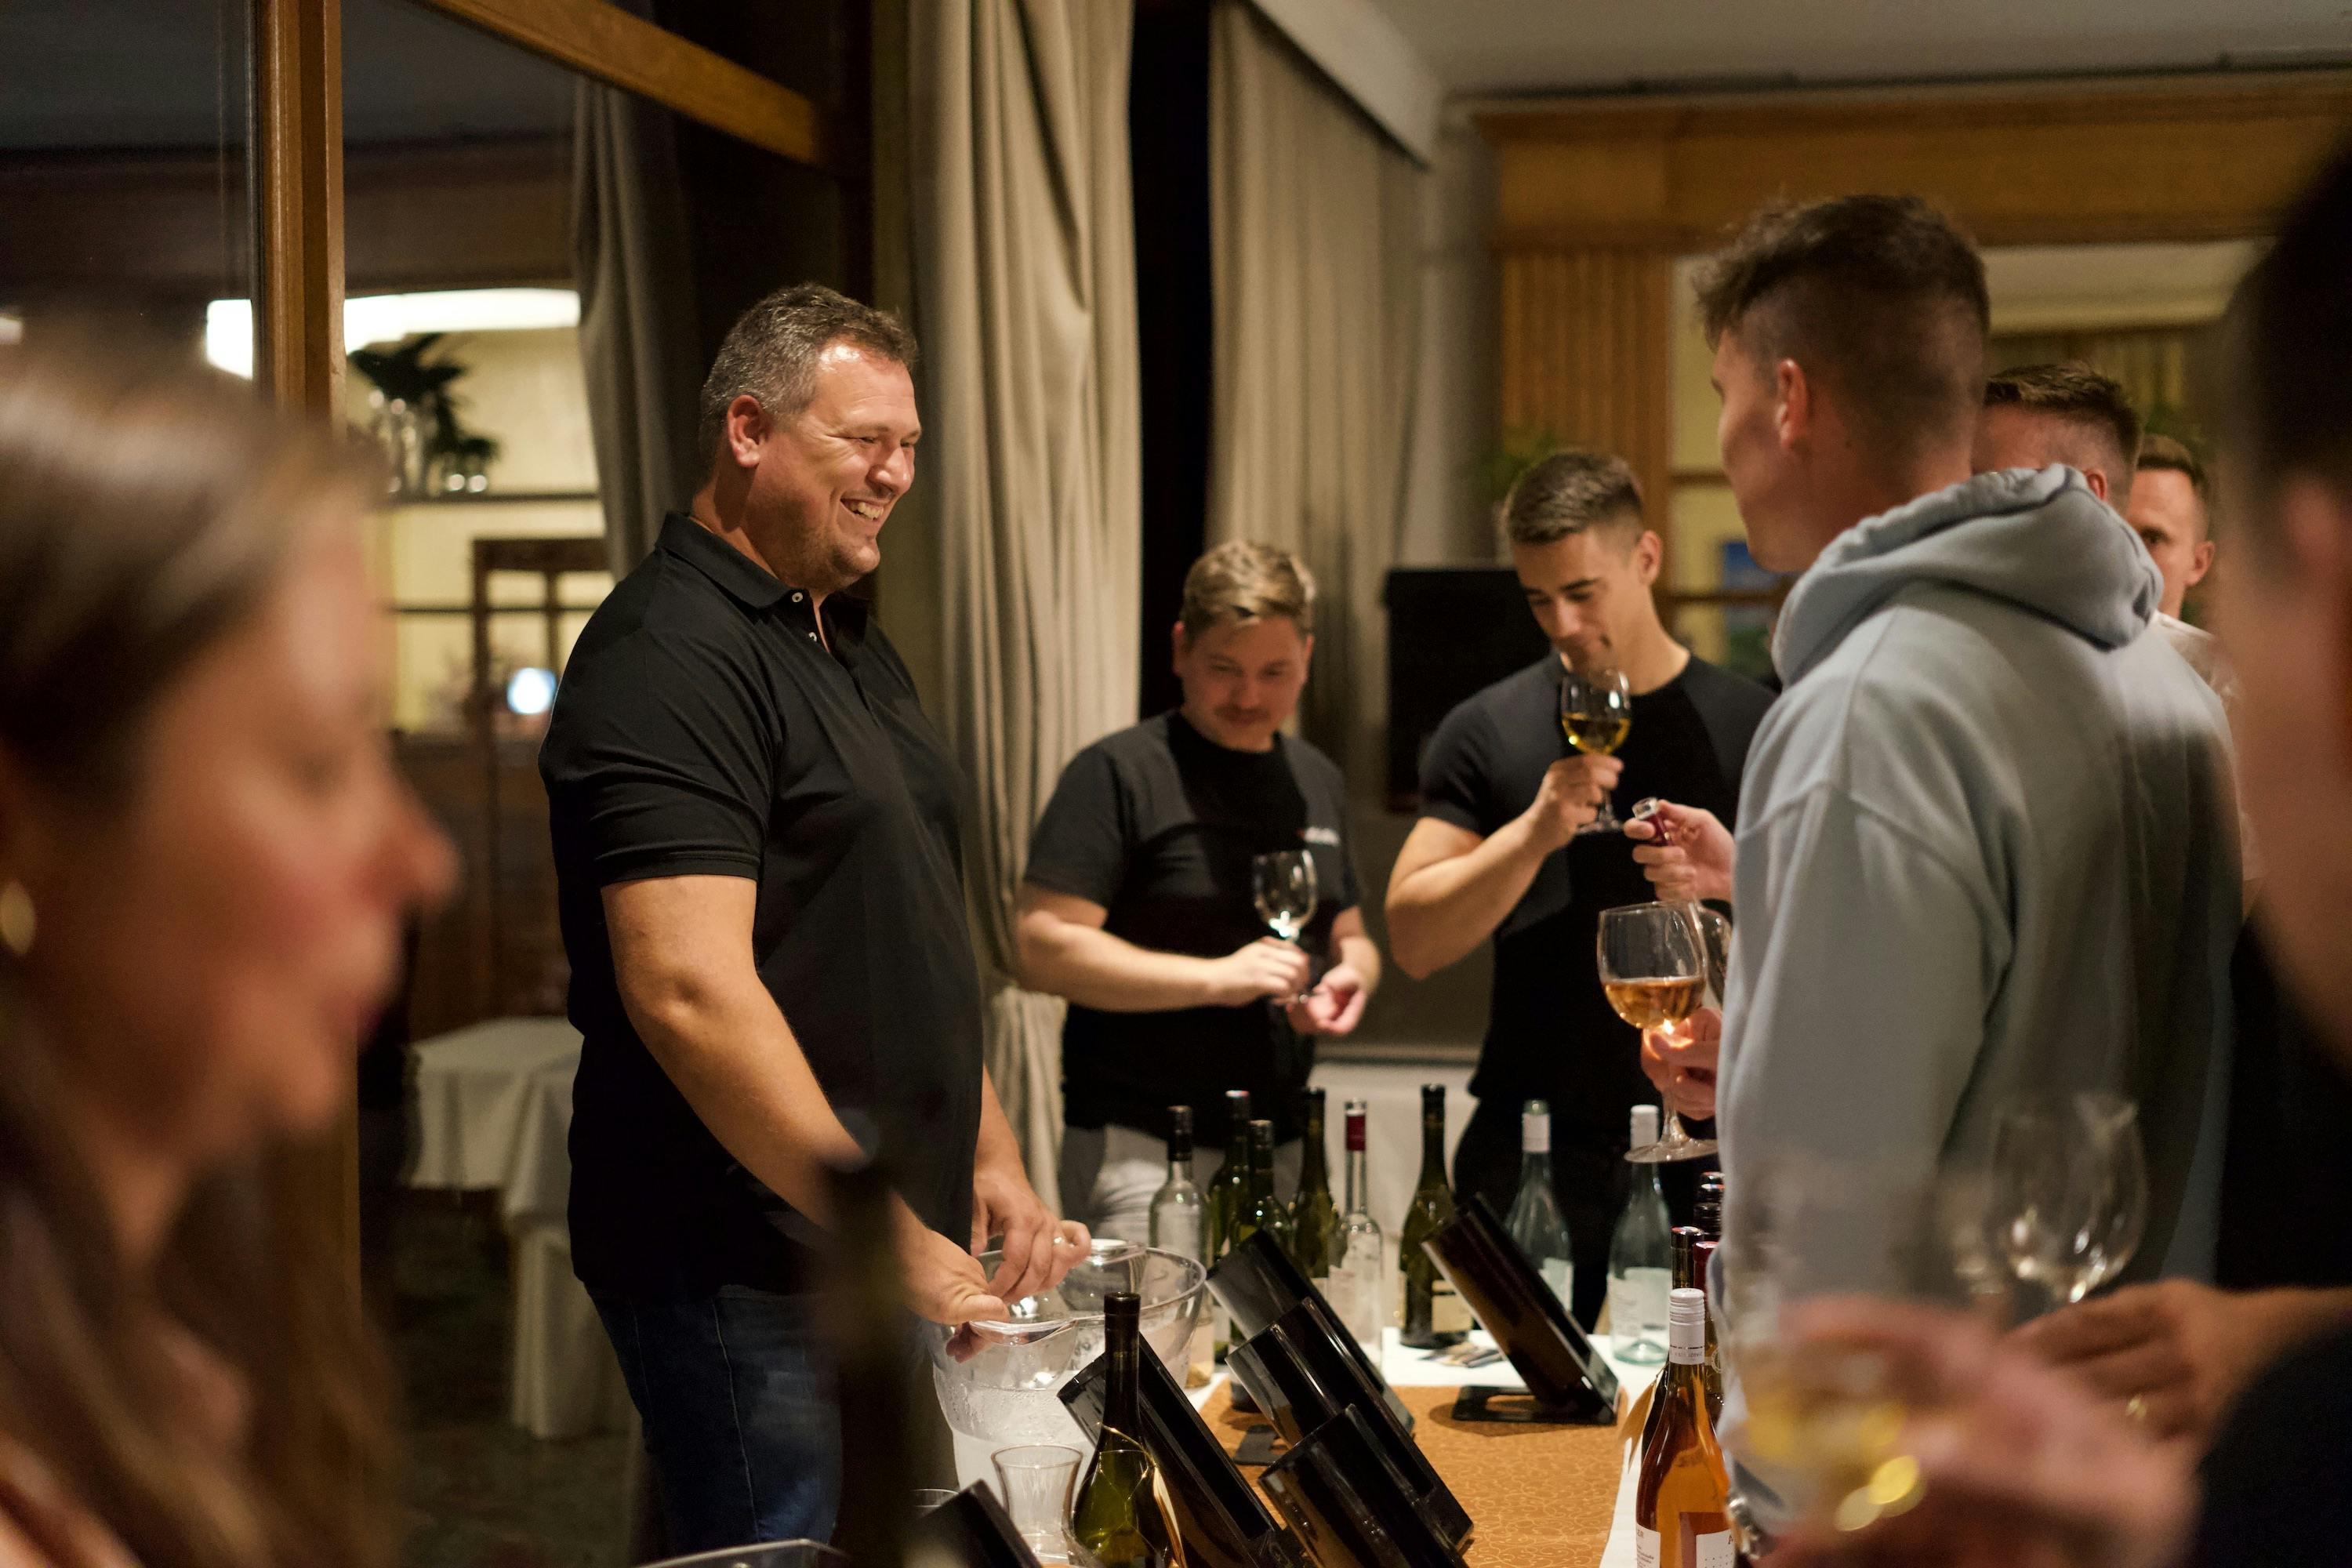 Sudoers tasting local wines and learning about the history of Tokaj region